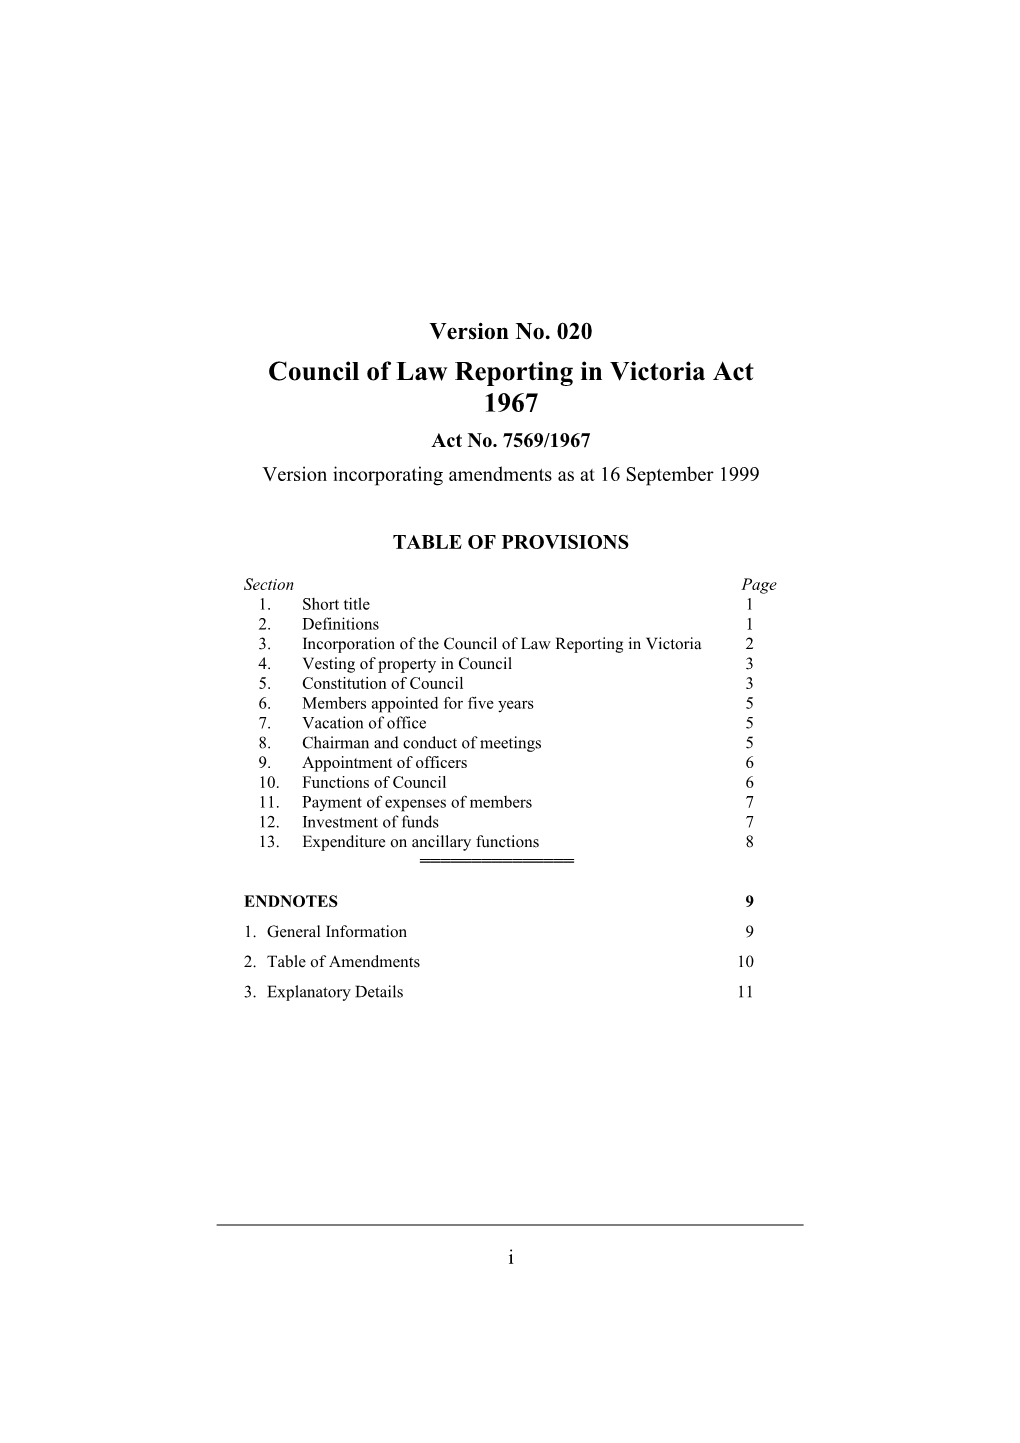 Council of Law Reporting in Victoria Act 1967